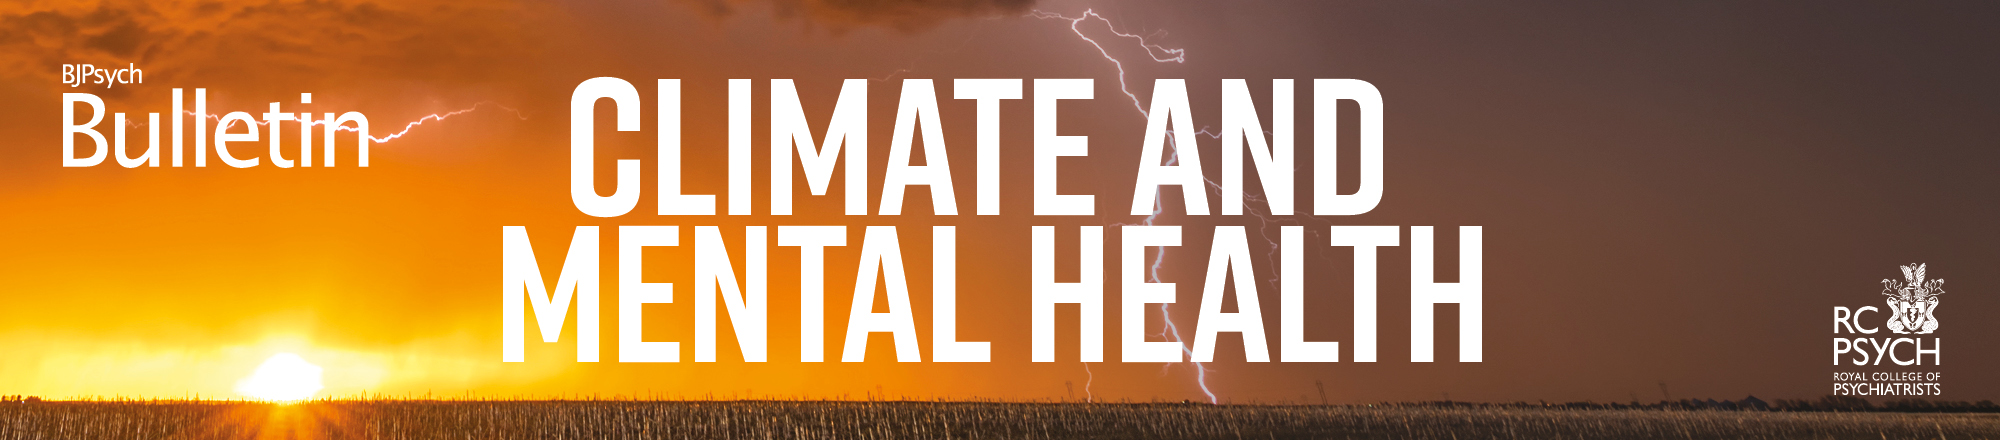 BJB Climate and Mental Health Special Issue Core Banner